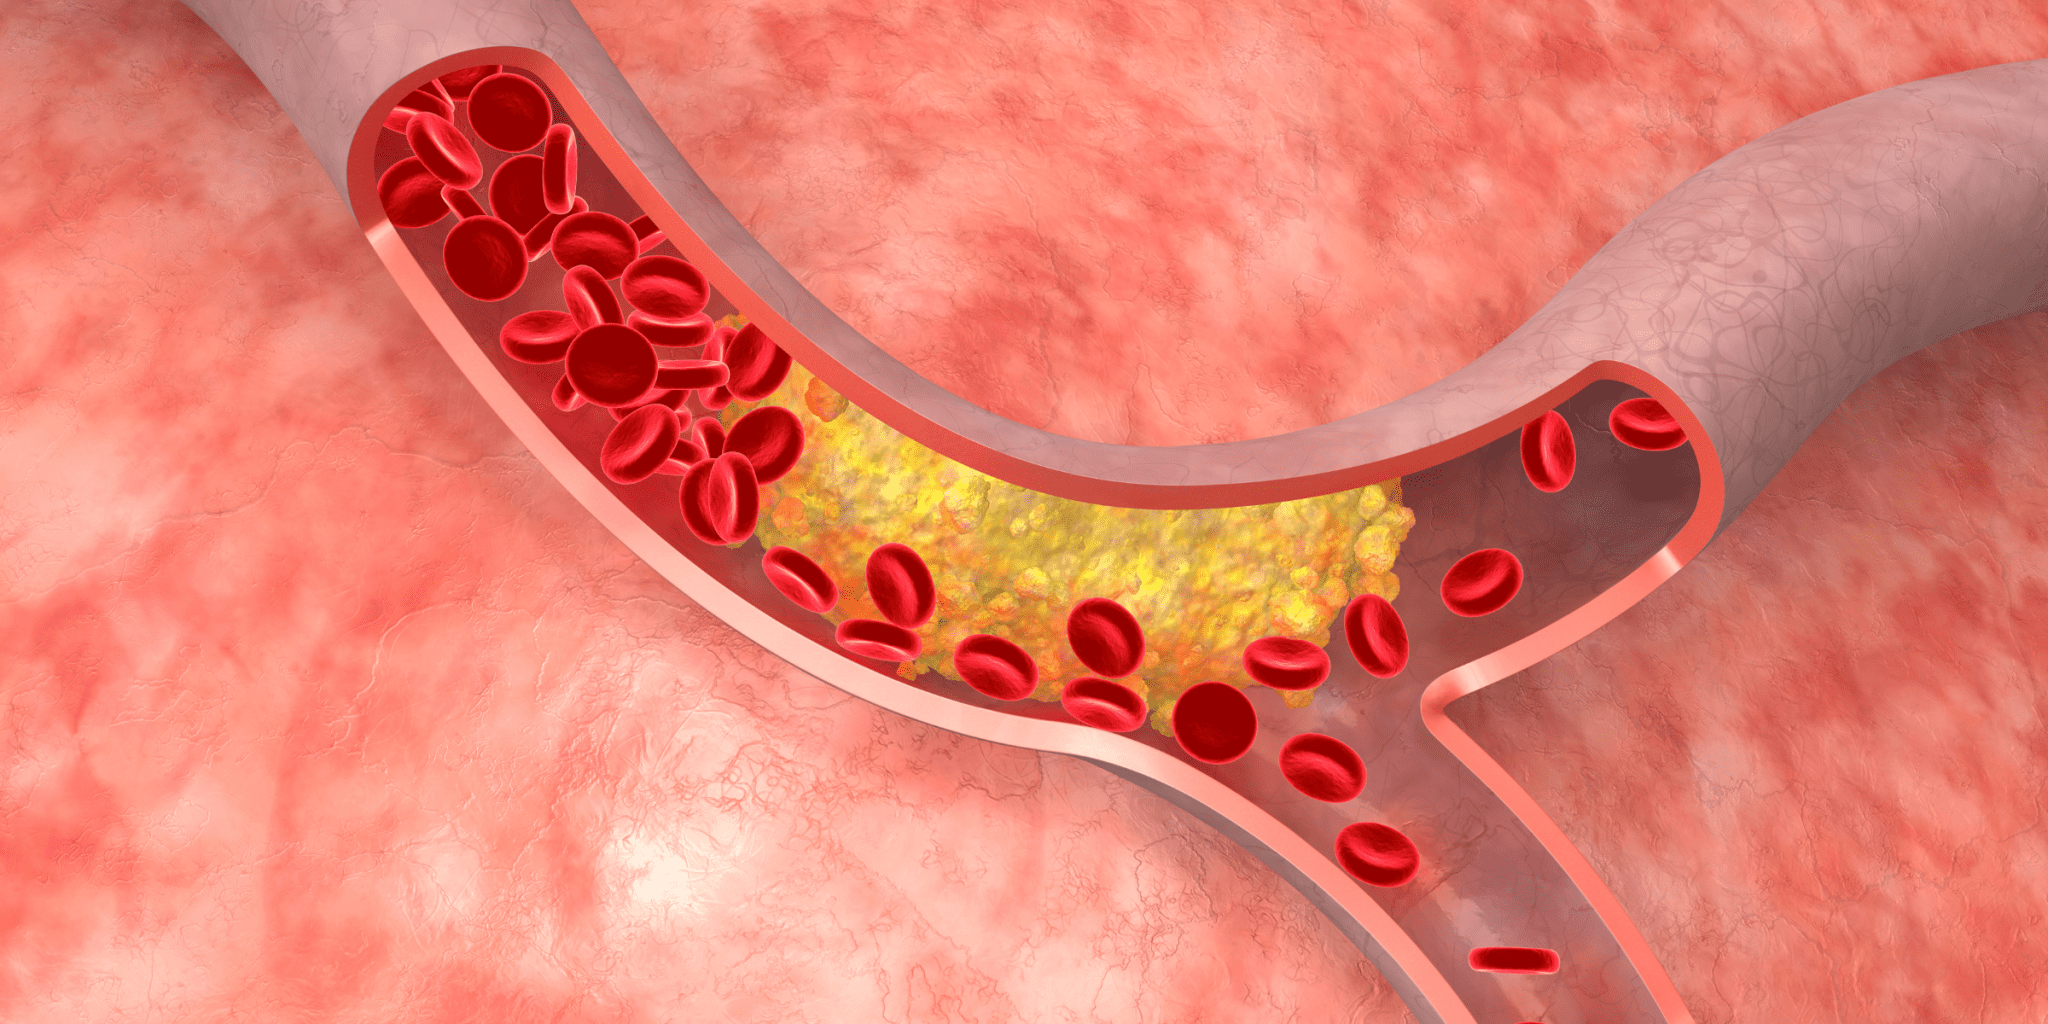 blood vessel clogged with cholesterol with PAD peripheral artery disease